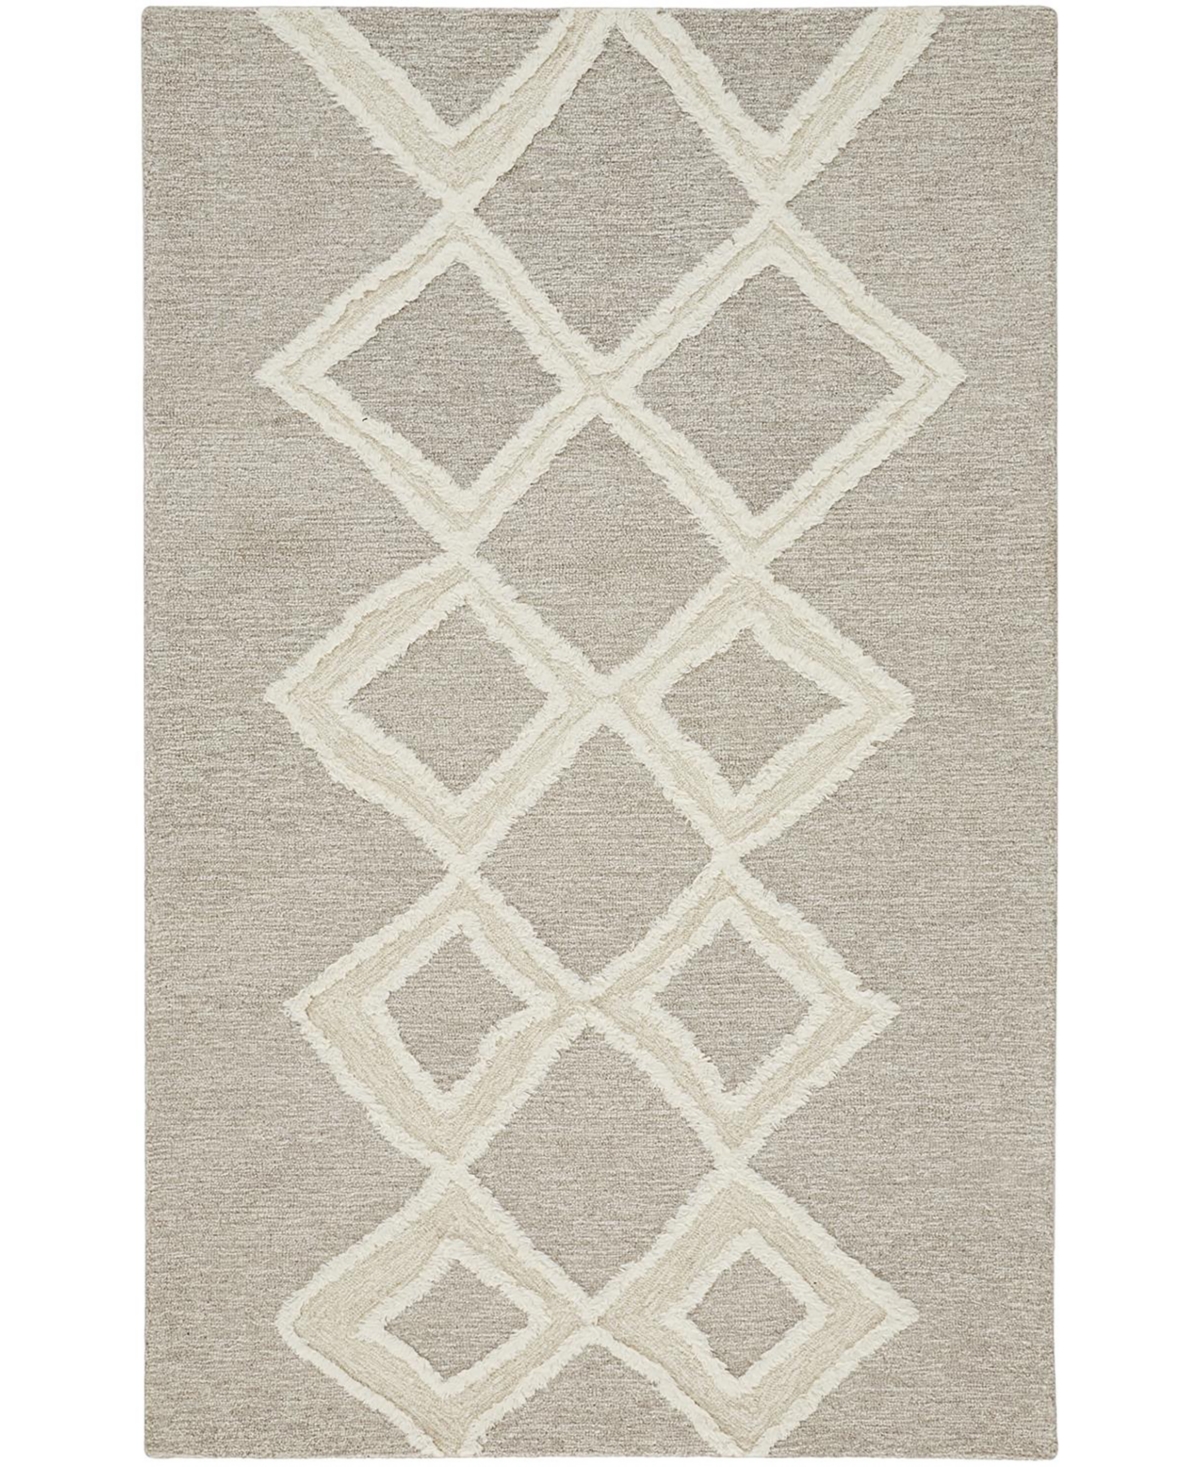 Simply Woven Anica R8009 4' X 6' Area Rug In Taupe